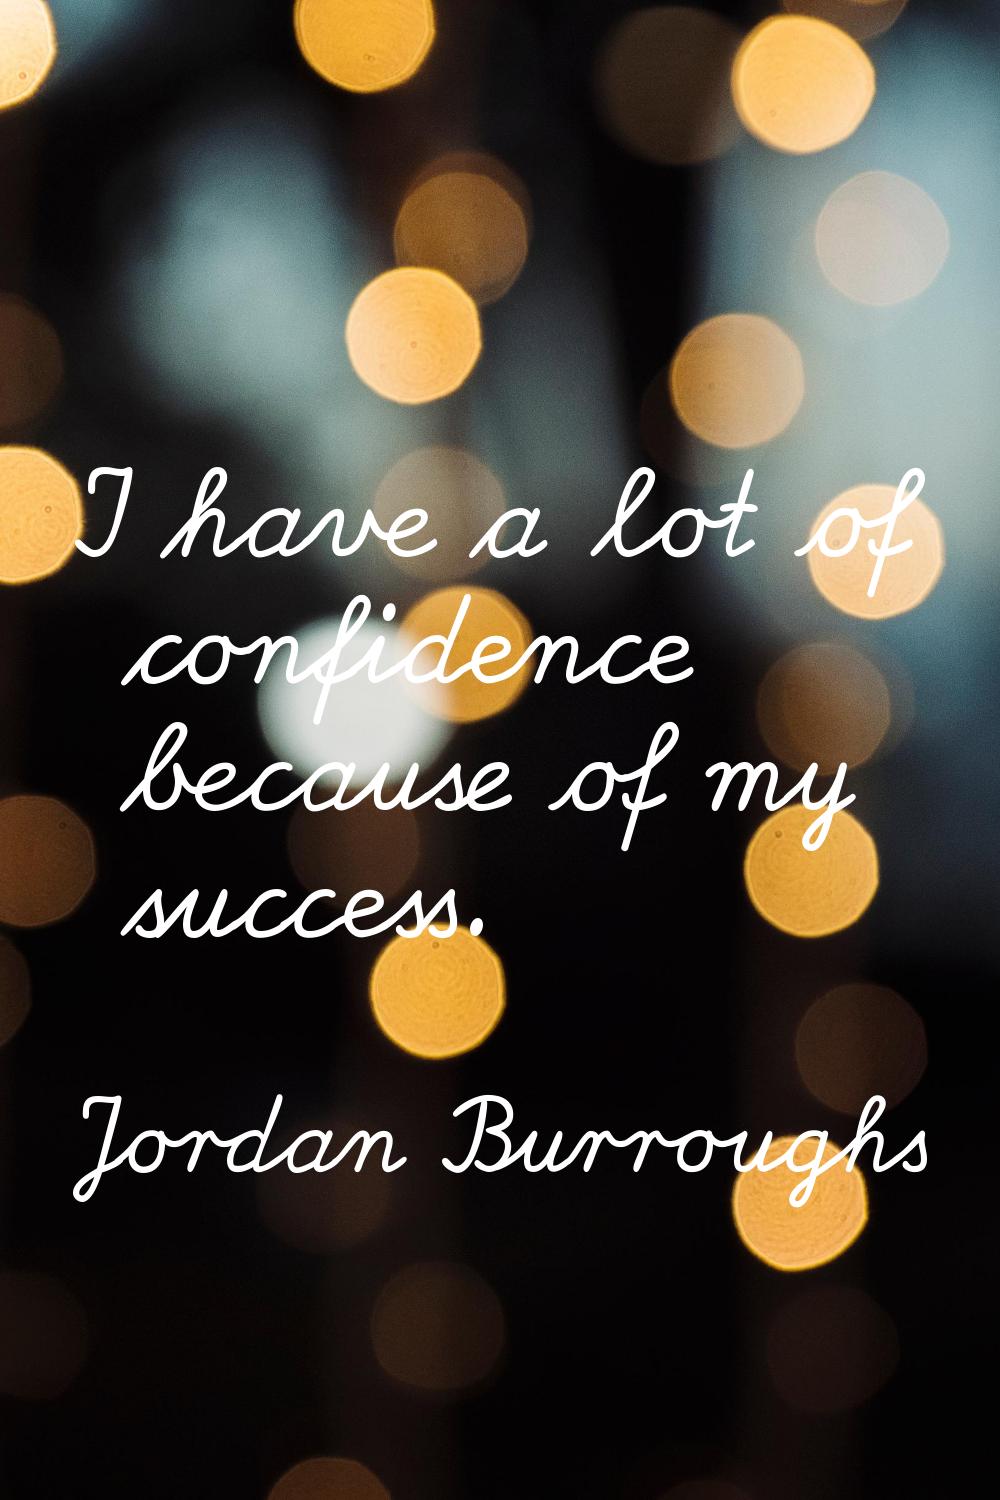 I have a lot of confidence because of my success.